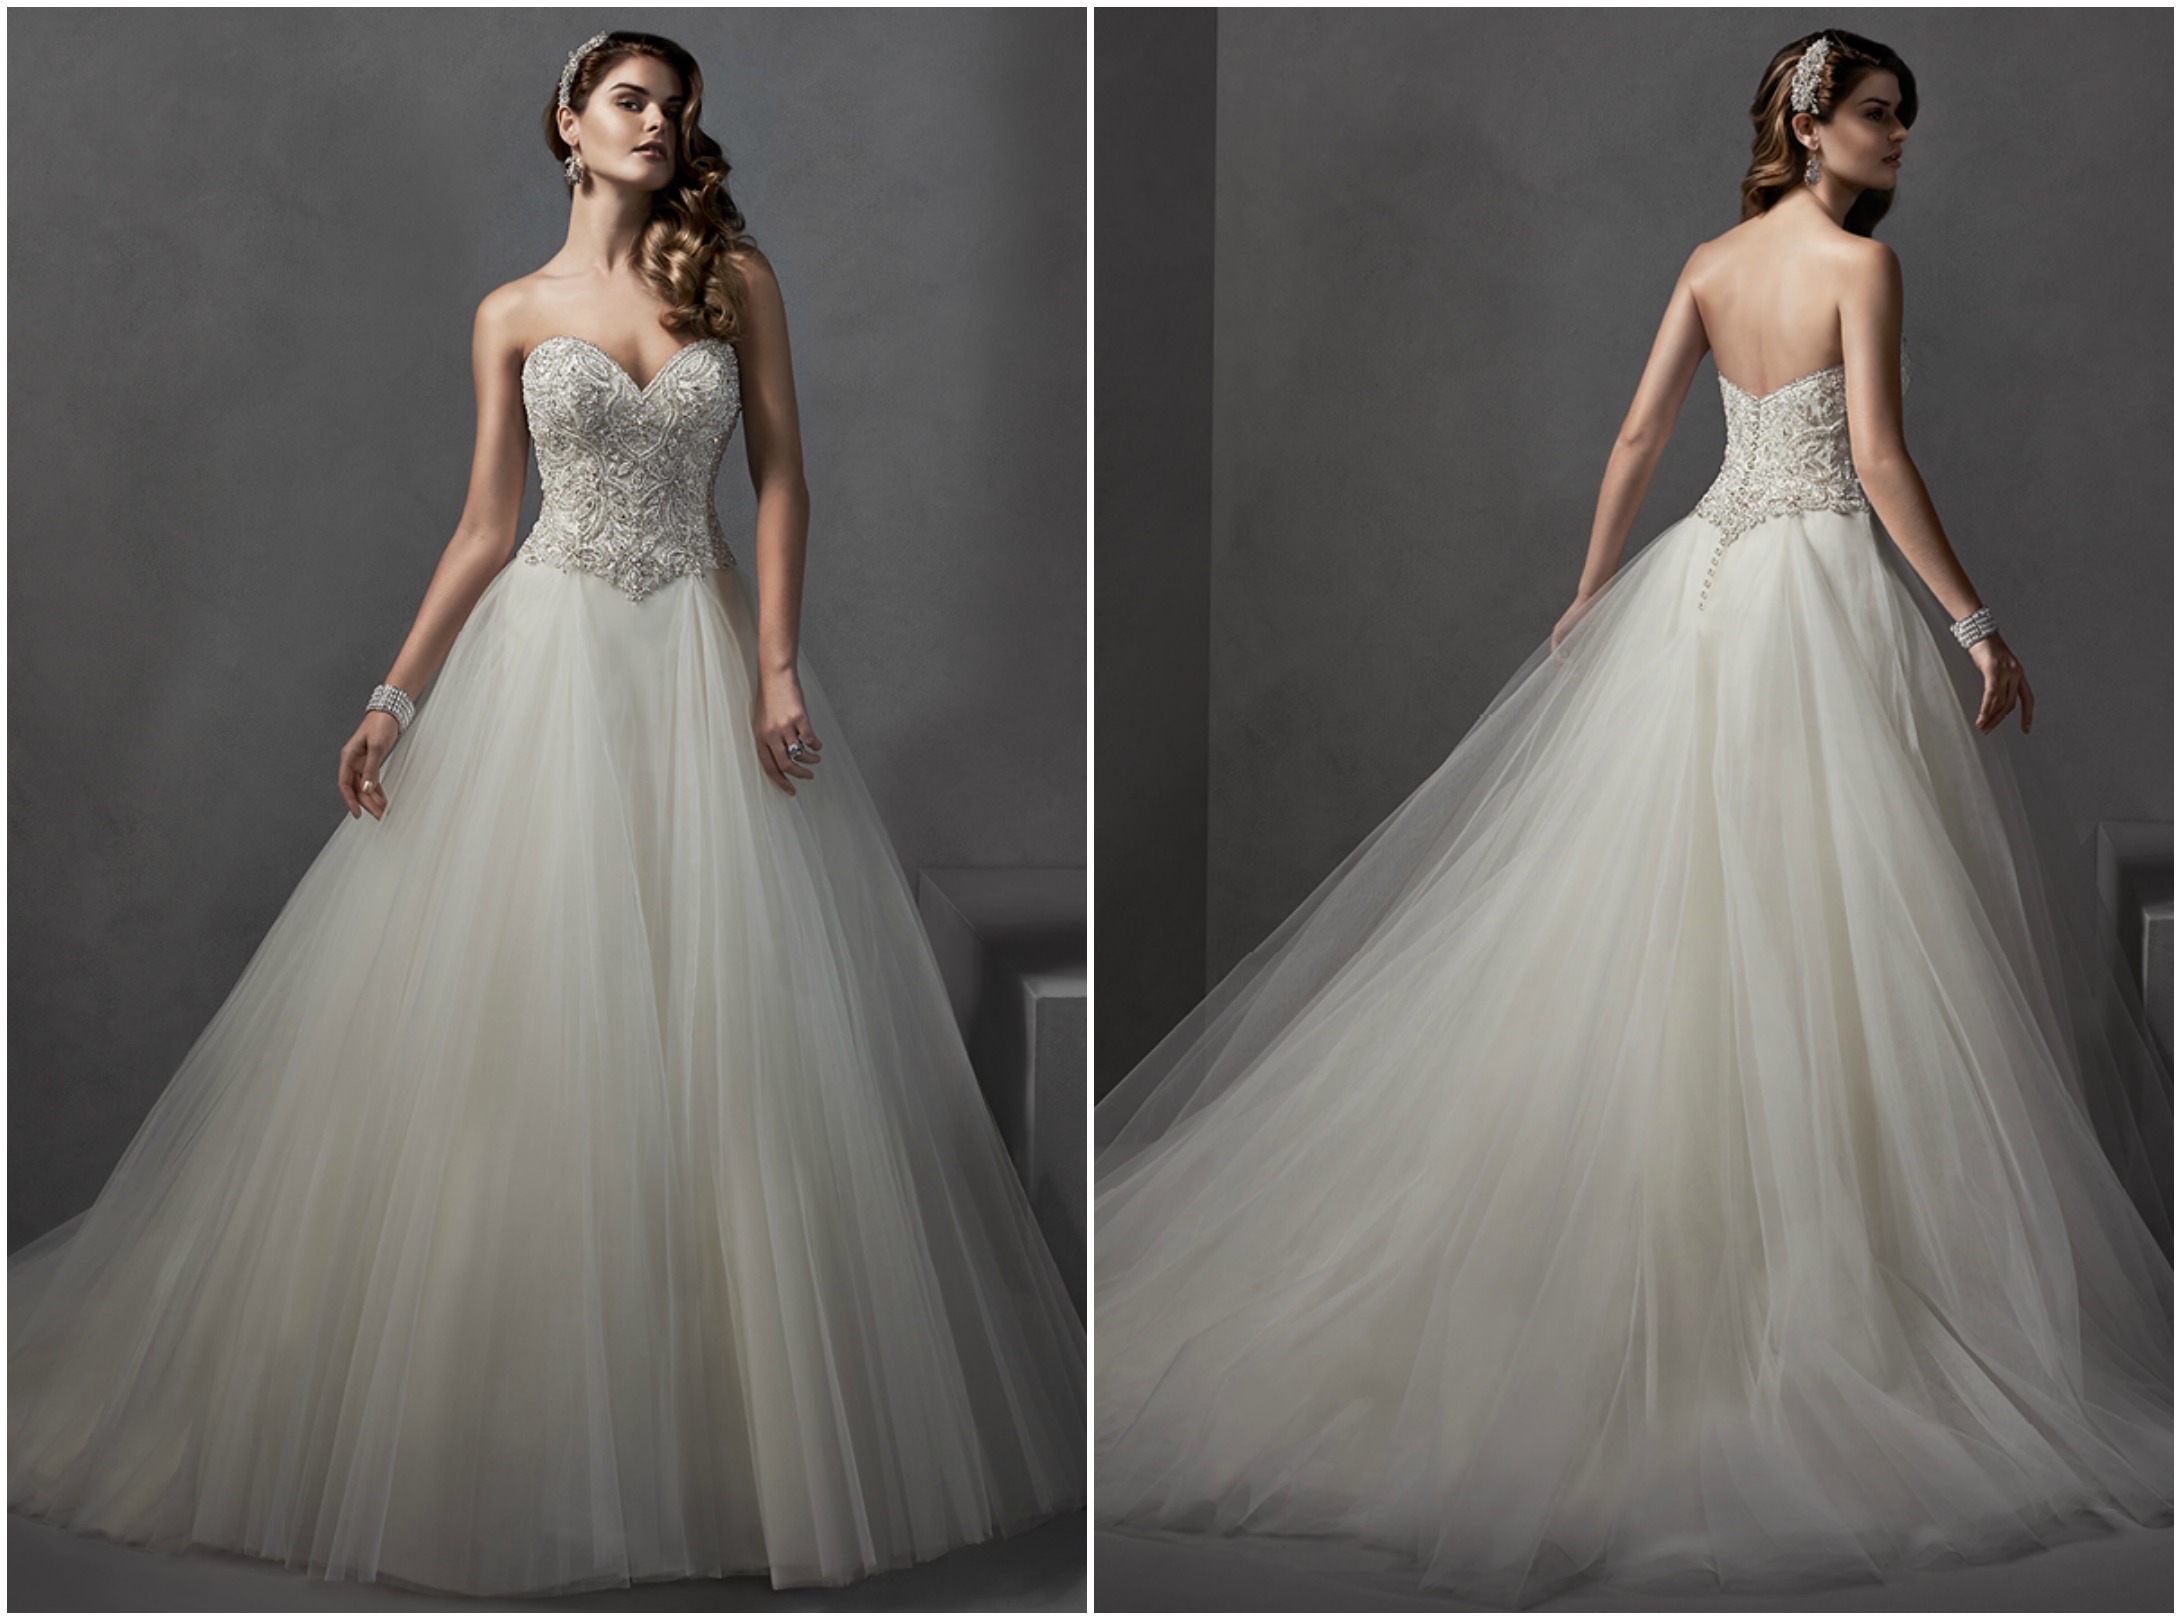 <a href="http://www.sotteroandmidgley.com/dress.aspx?style=5SS125&amp;page=0&amp;pageSize=36&amp;keywordText=&amp;keywordType=All" target="_blank">Sottero and Midgley 2016</a>